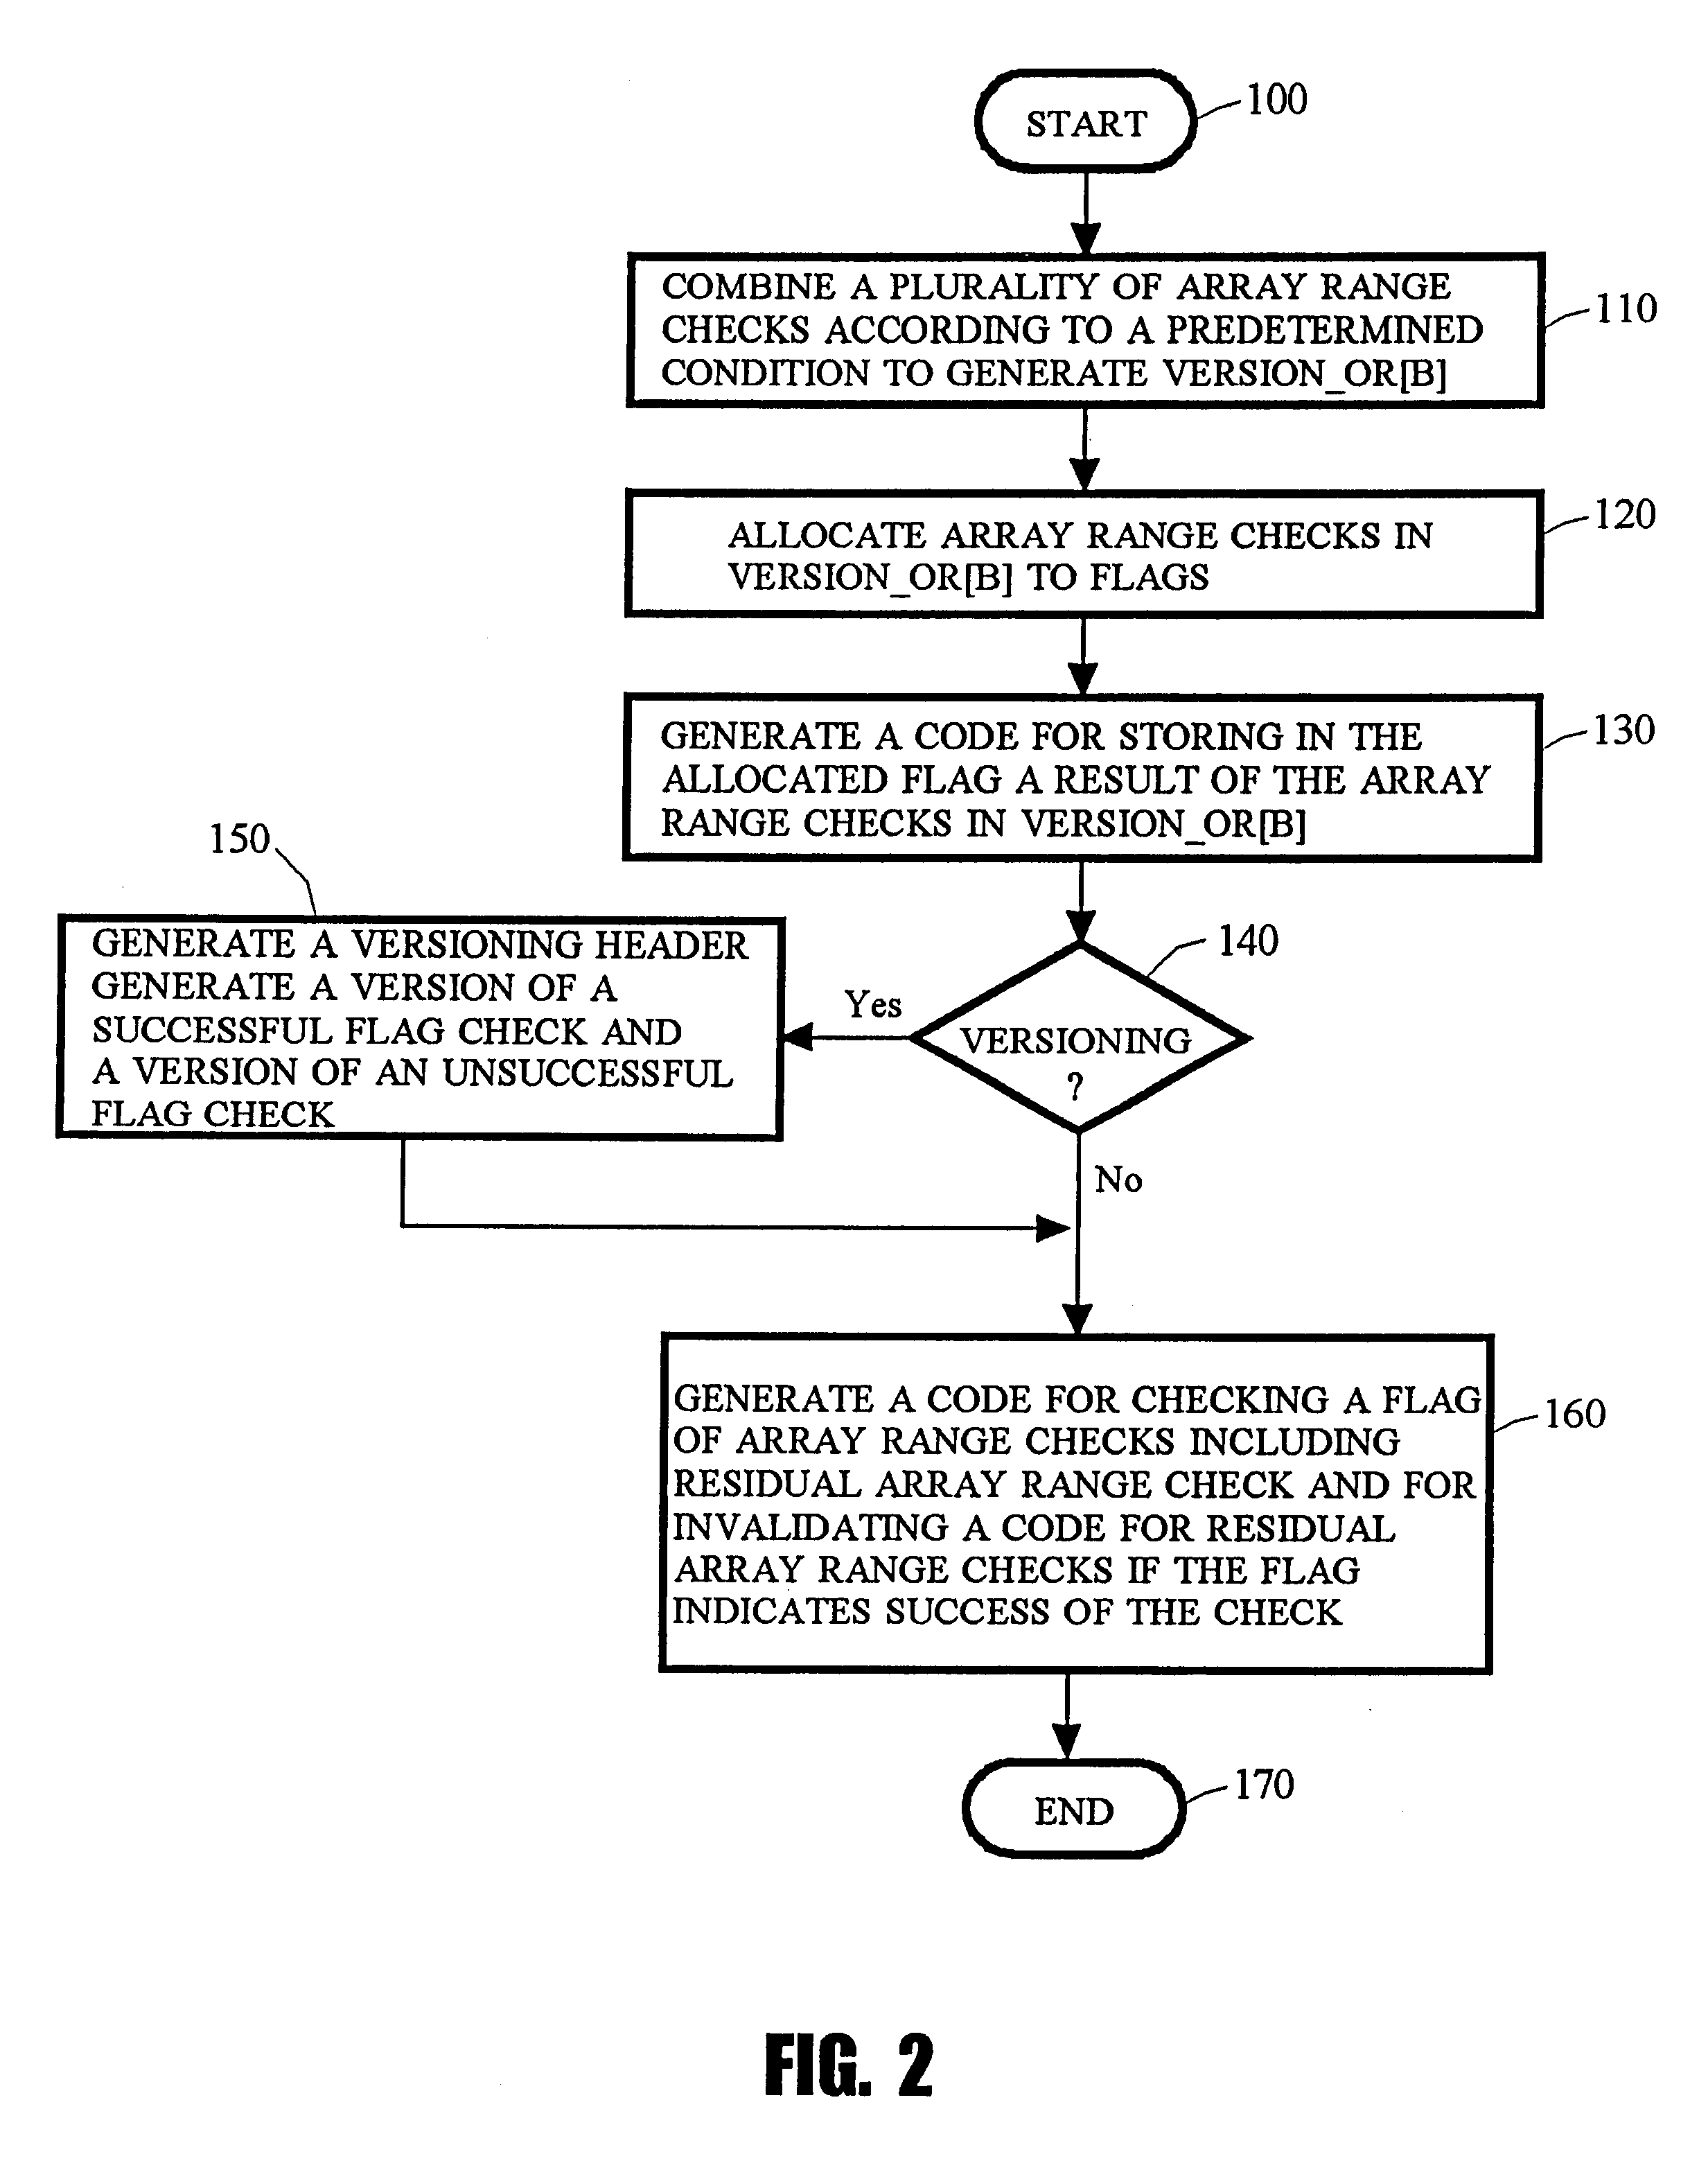 Method and apparatus for generating code for array range check and method and apparatus for versioning